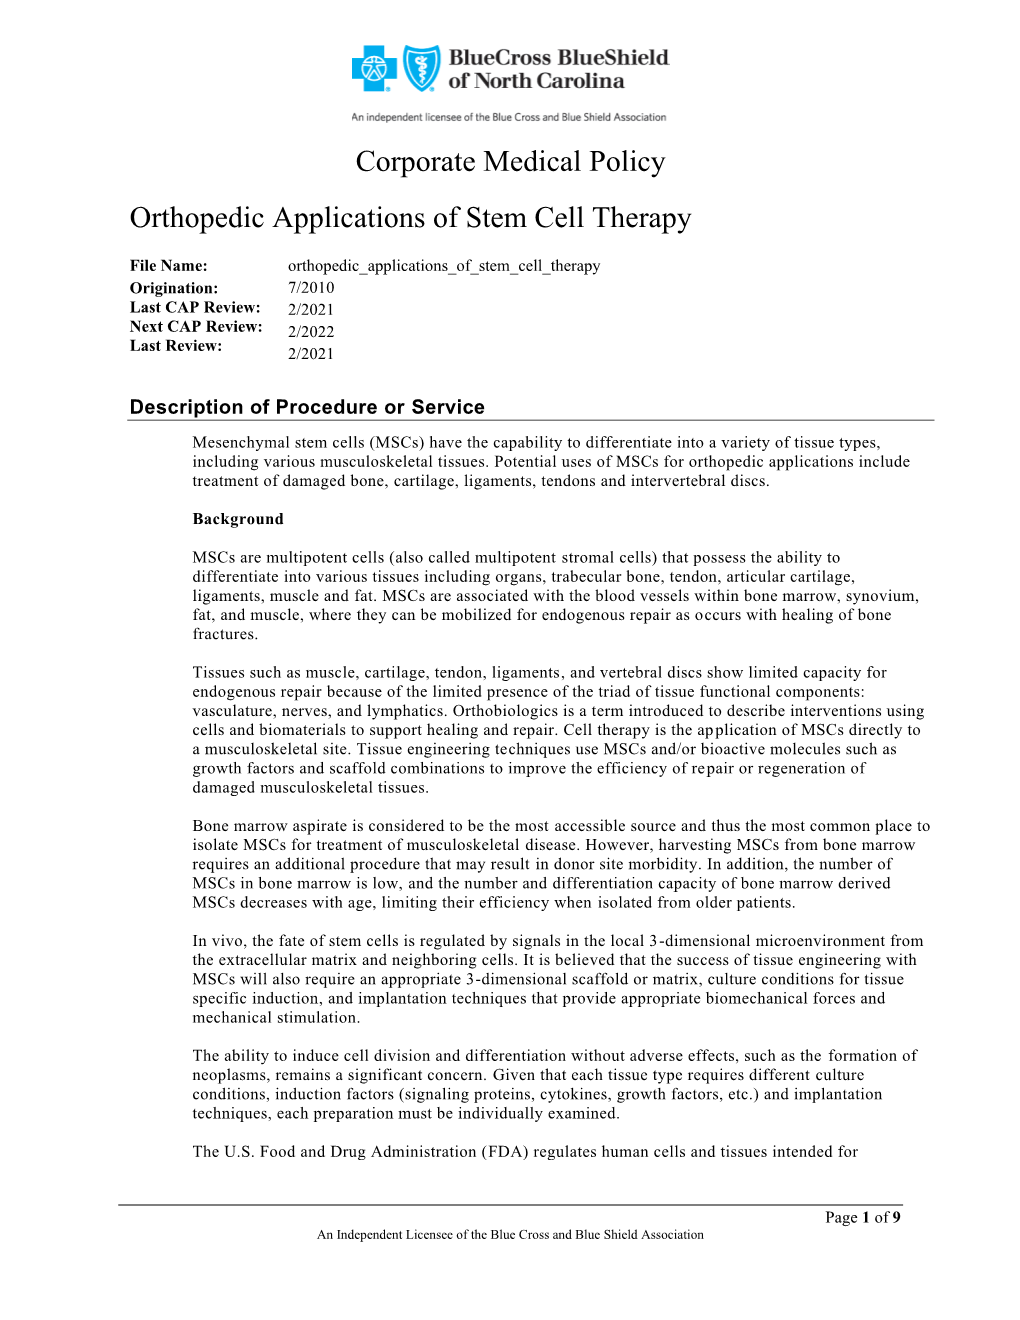 Orthopedic Applications of Stem Cell Therapy